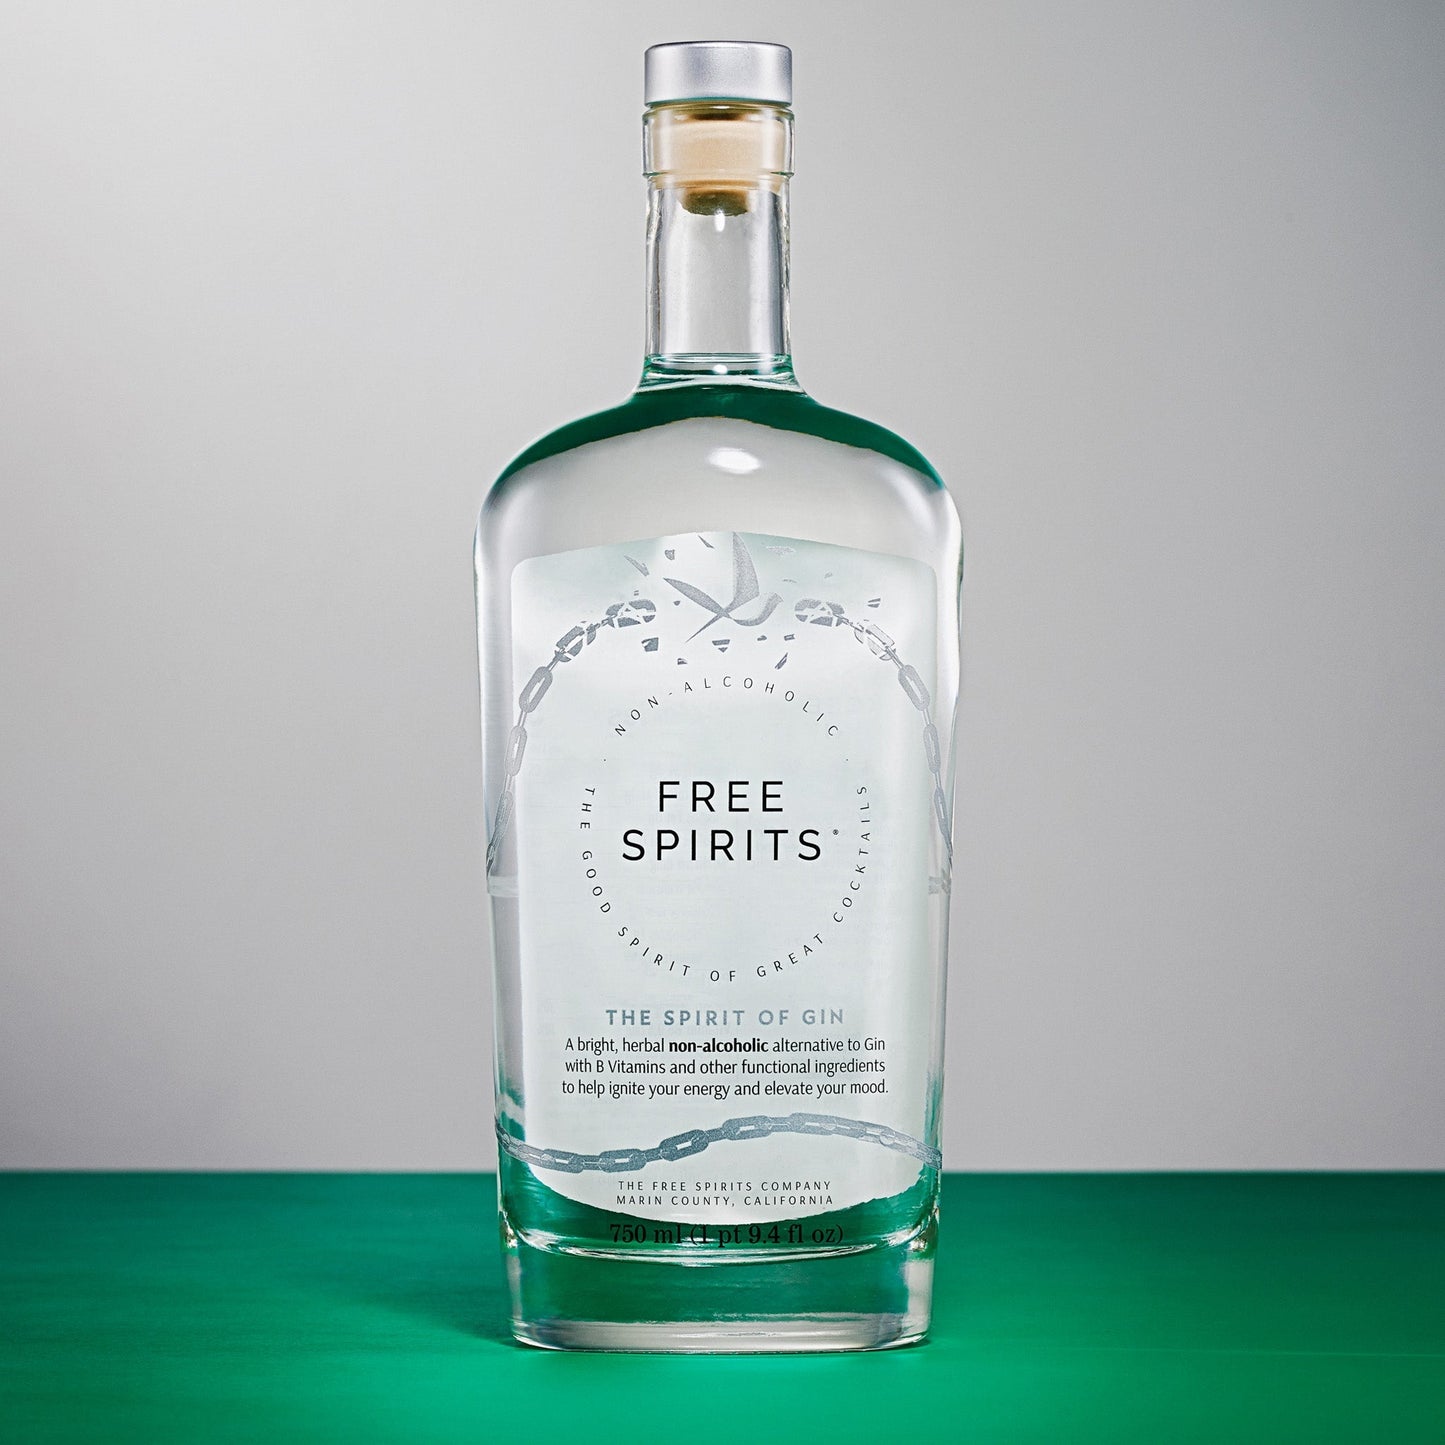 The Spirit of Gin by The Free Spirits Company